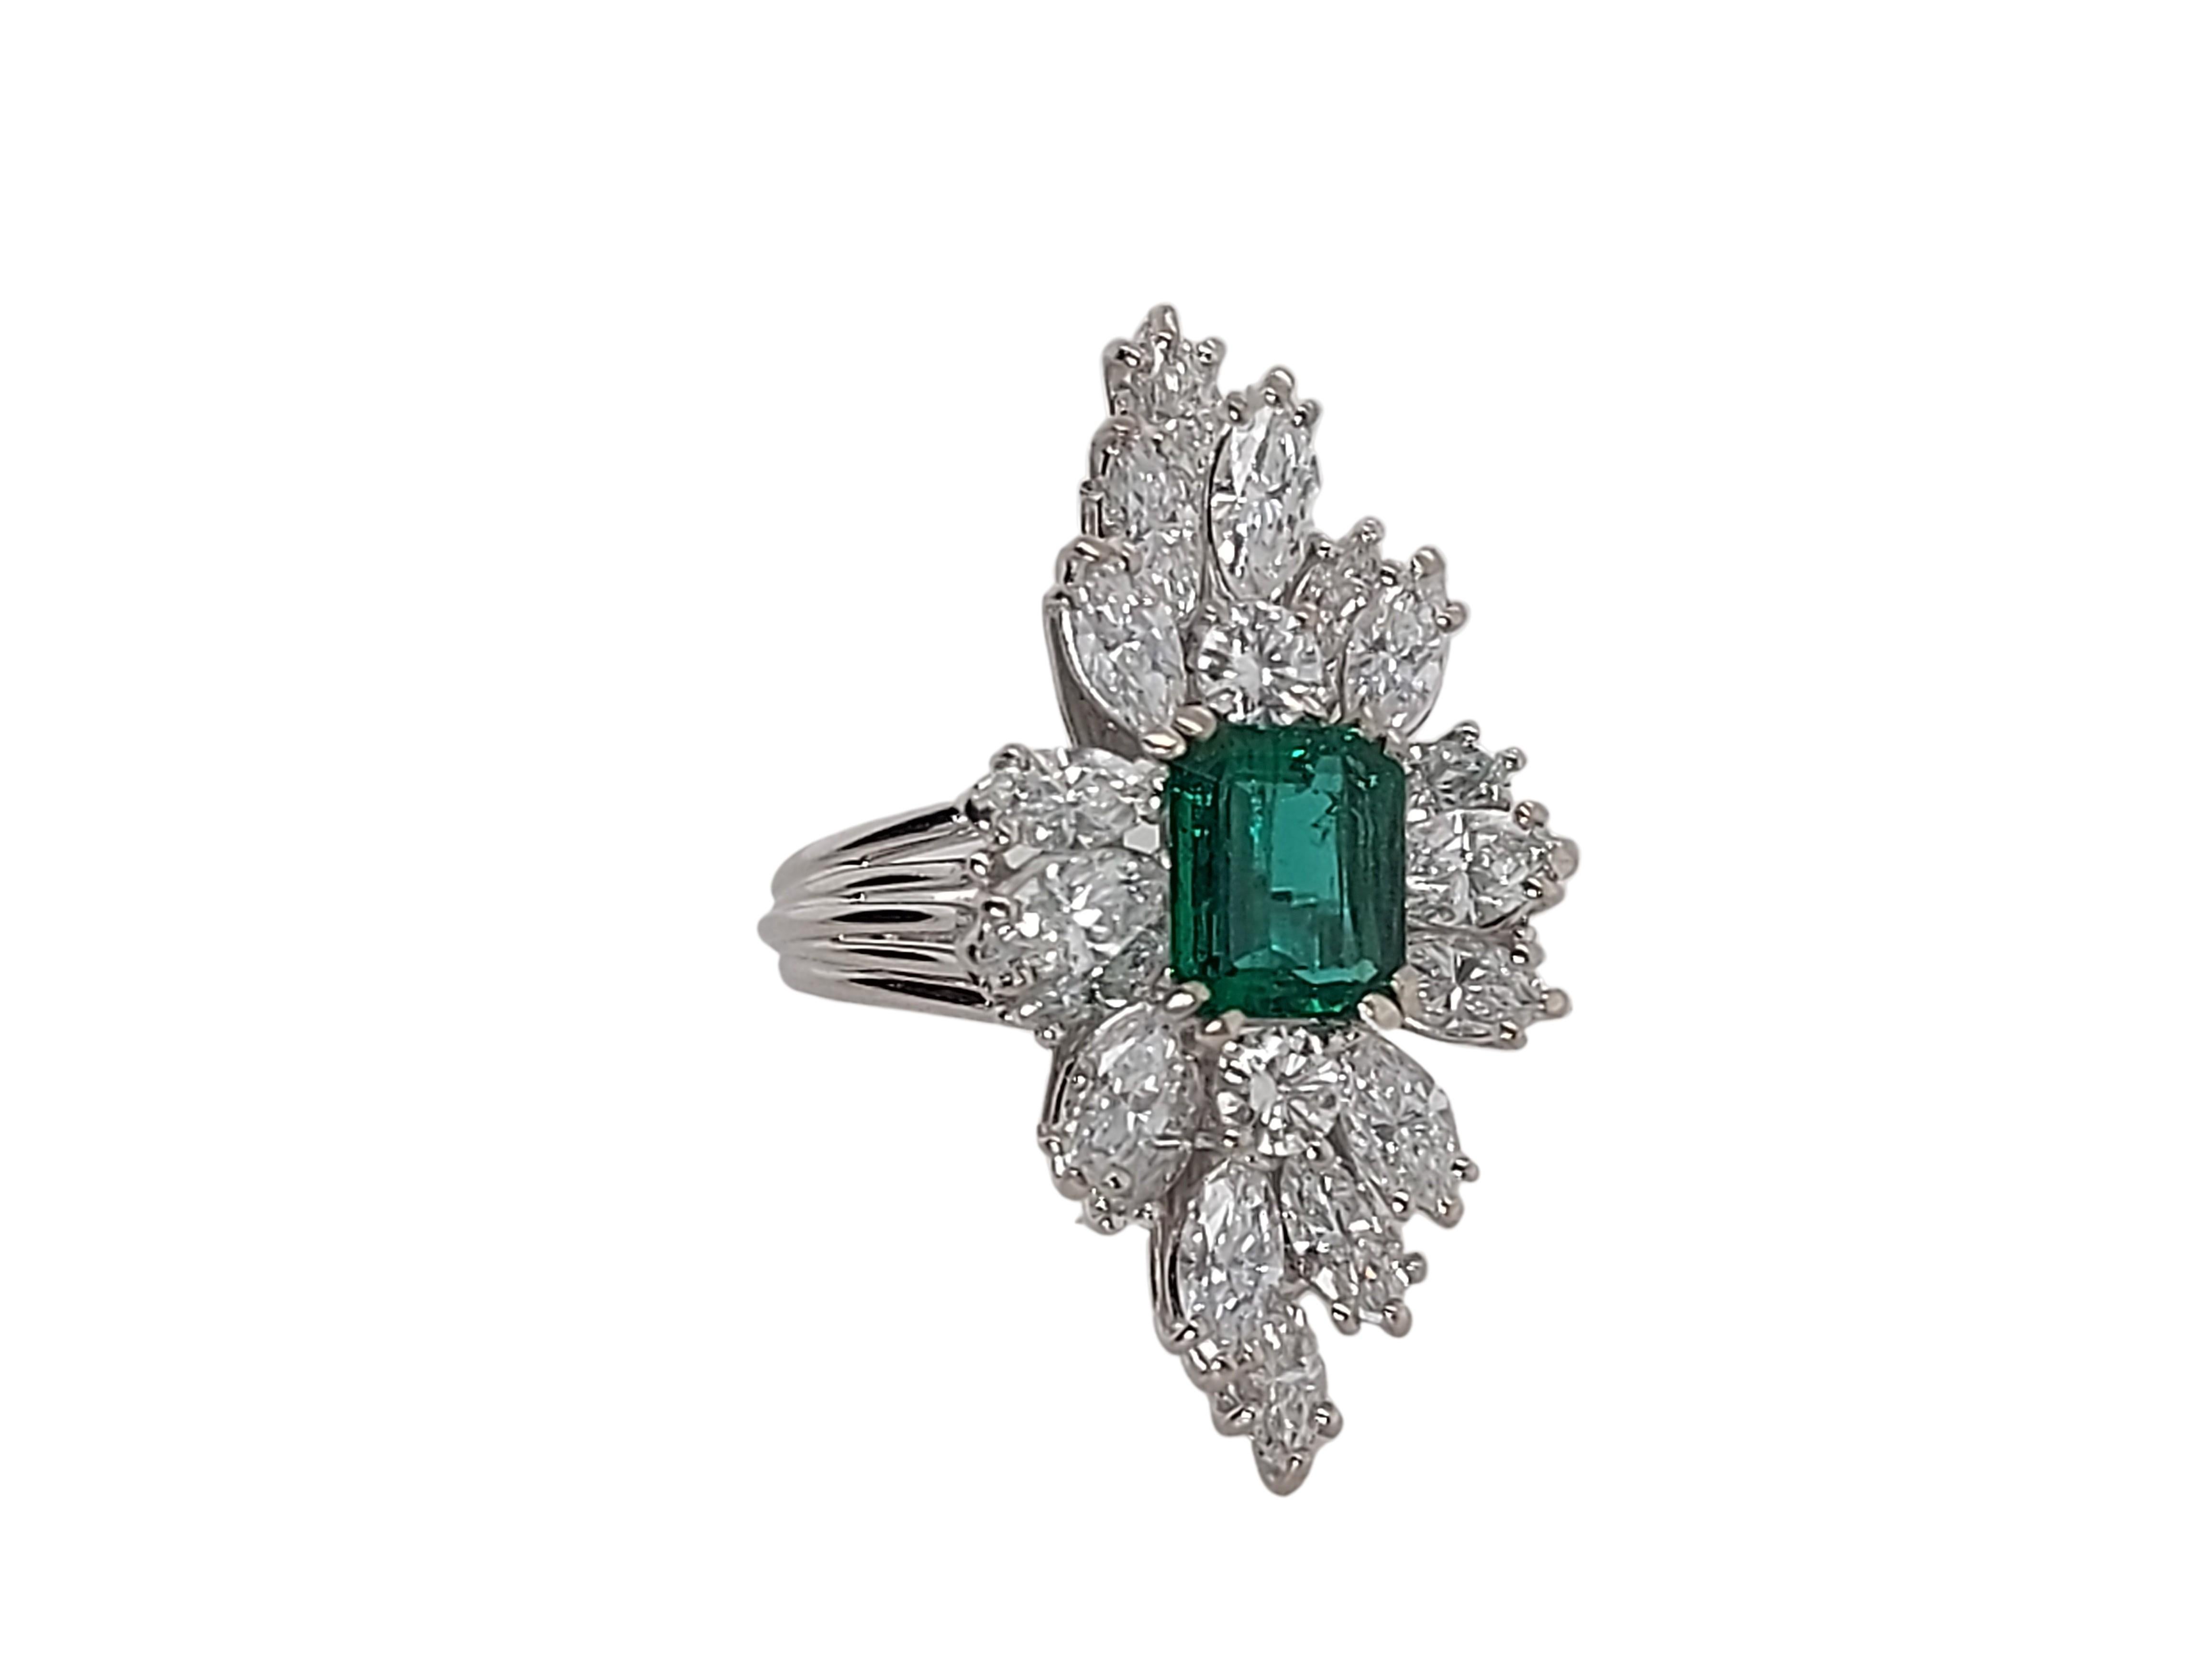 Octagon Cut 18kt White Gold Ring with 1.49 Ct Emerald Stone Surrounded by Diamonds For Sale